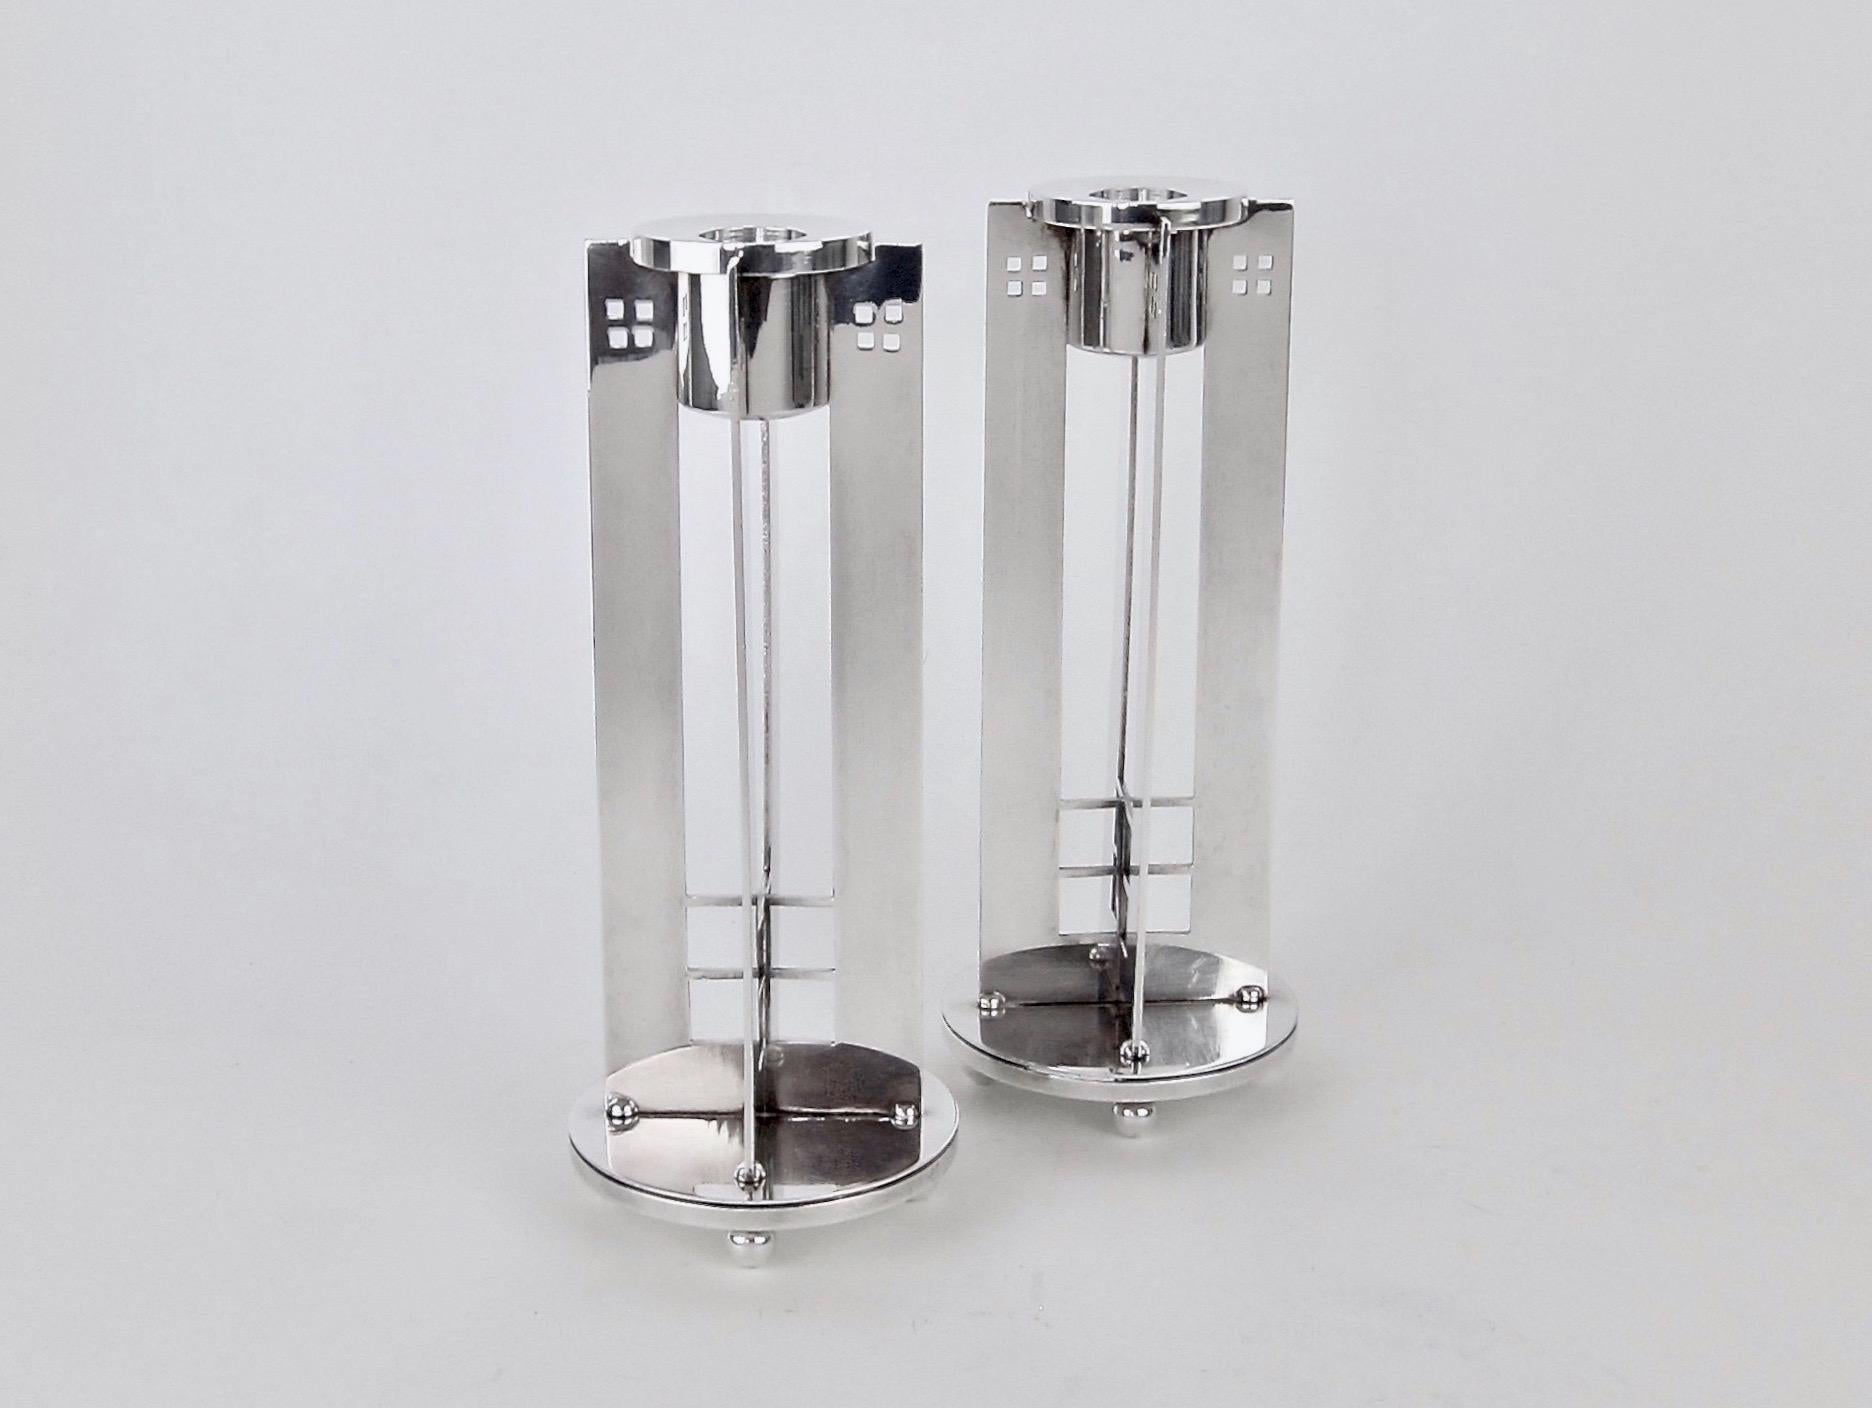 A vintage pair of sculptural “King Richard” candlesticks designed in silver-plate by American architect Richard Meier (b. 1934) for Swid Powell in 1983. The modernist candle holders were part of Swid Powell's inaugural collection of high-style